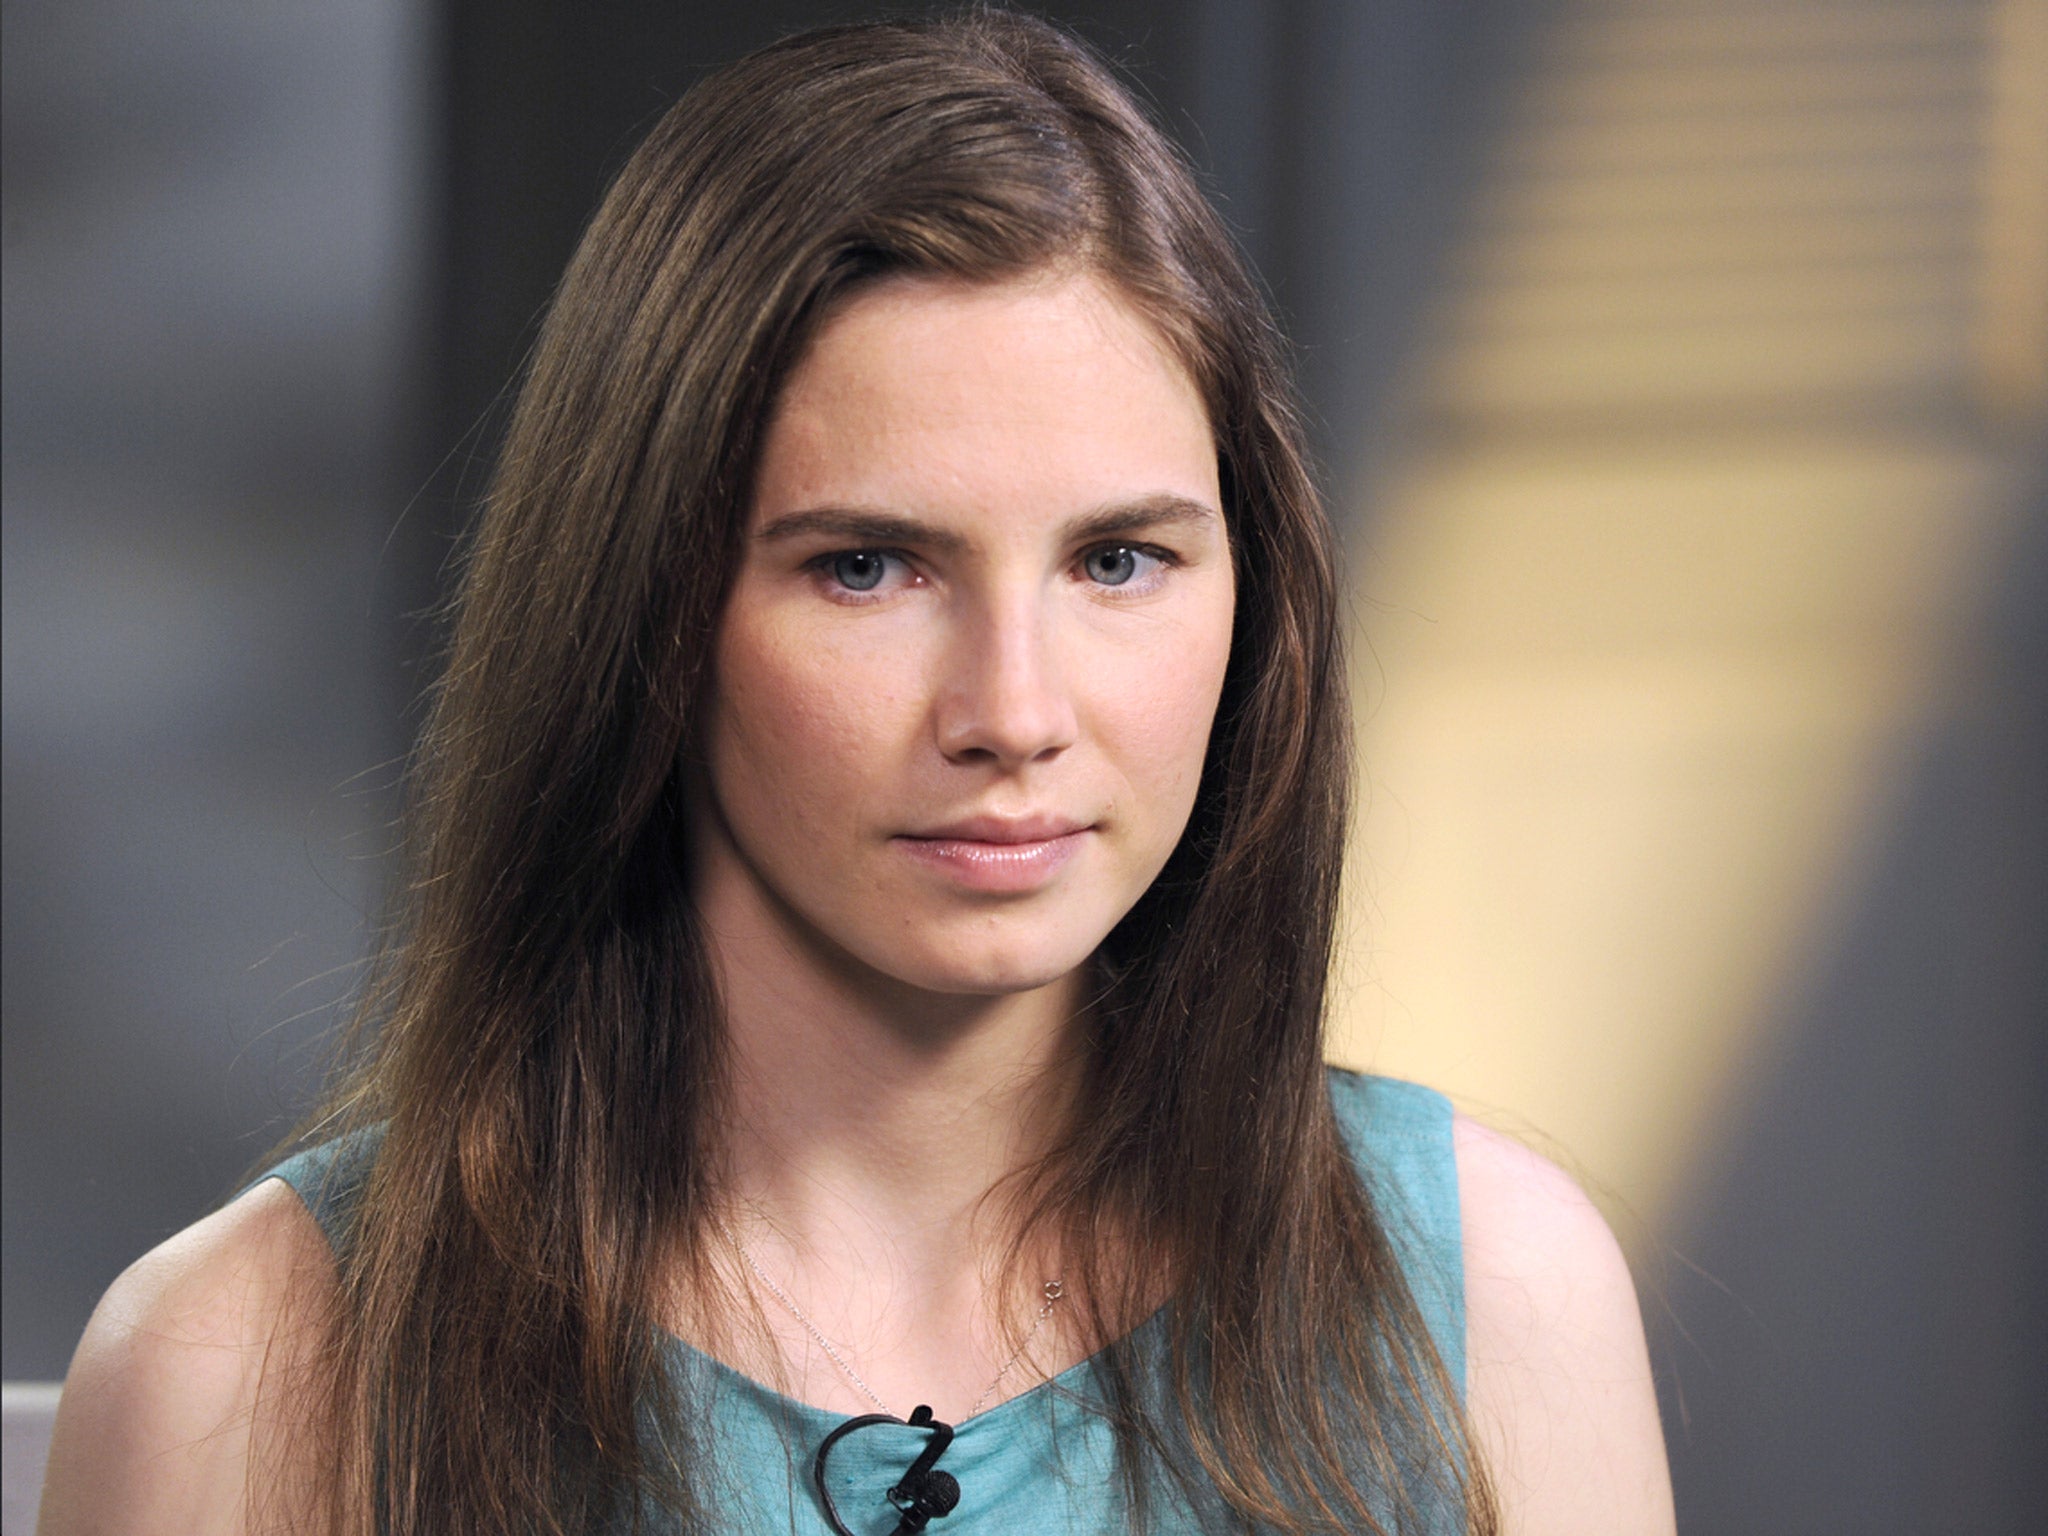 Amanda Knox served two years in prison before having her conviction overturned